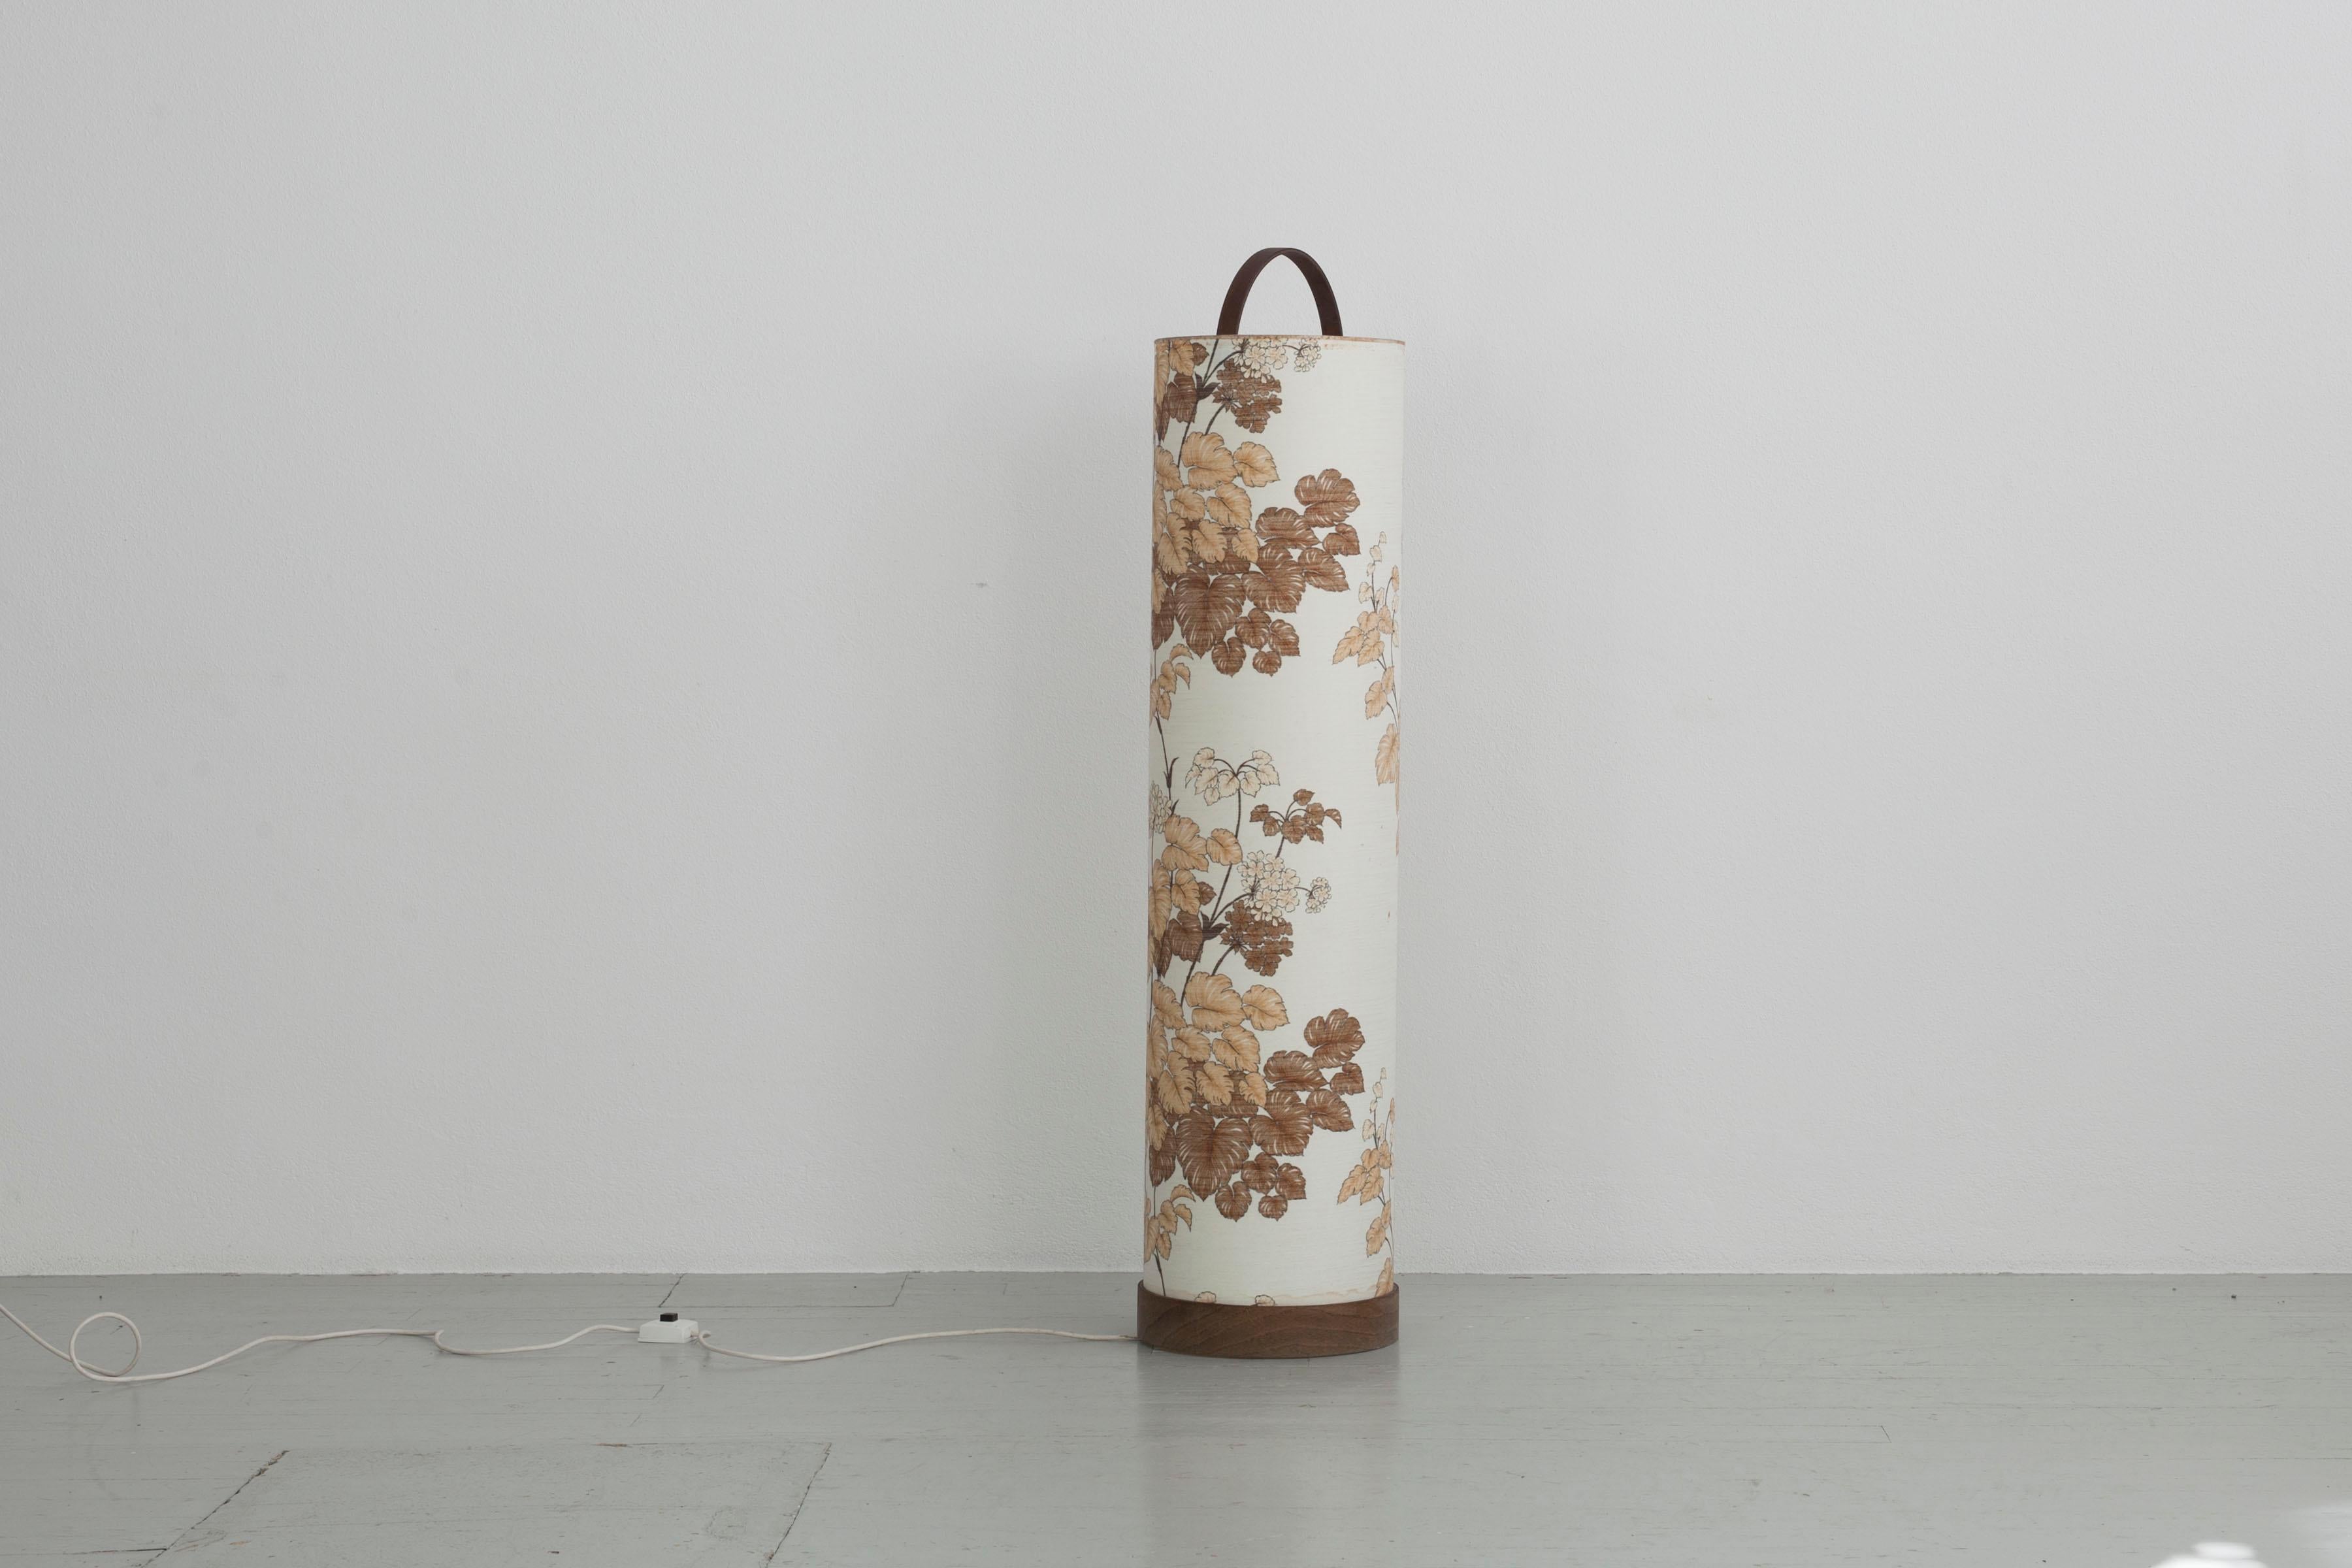 Cylindrical floor lamp from the 70s. The lampshade is continuous to the floor and covered with a floral fabric. The base as well as the handle of the lamp is made of teak wood. It is 132cm high and has a diameter of 31cm. The lamp has an E27 socket.